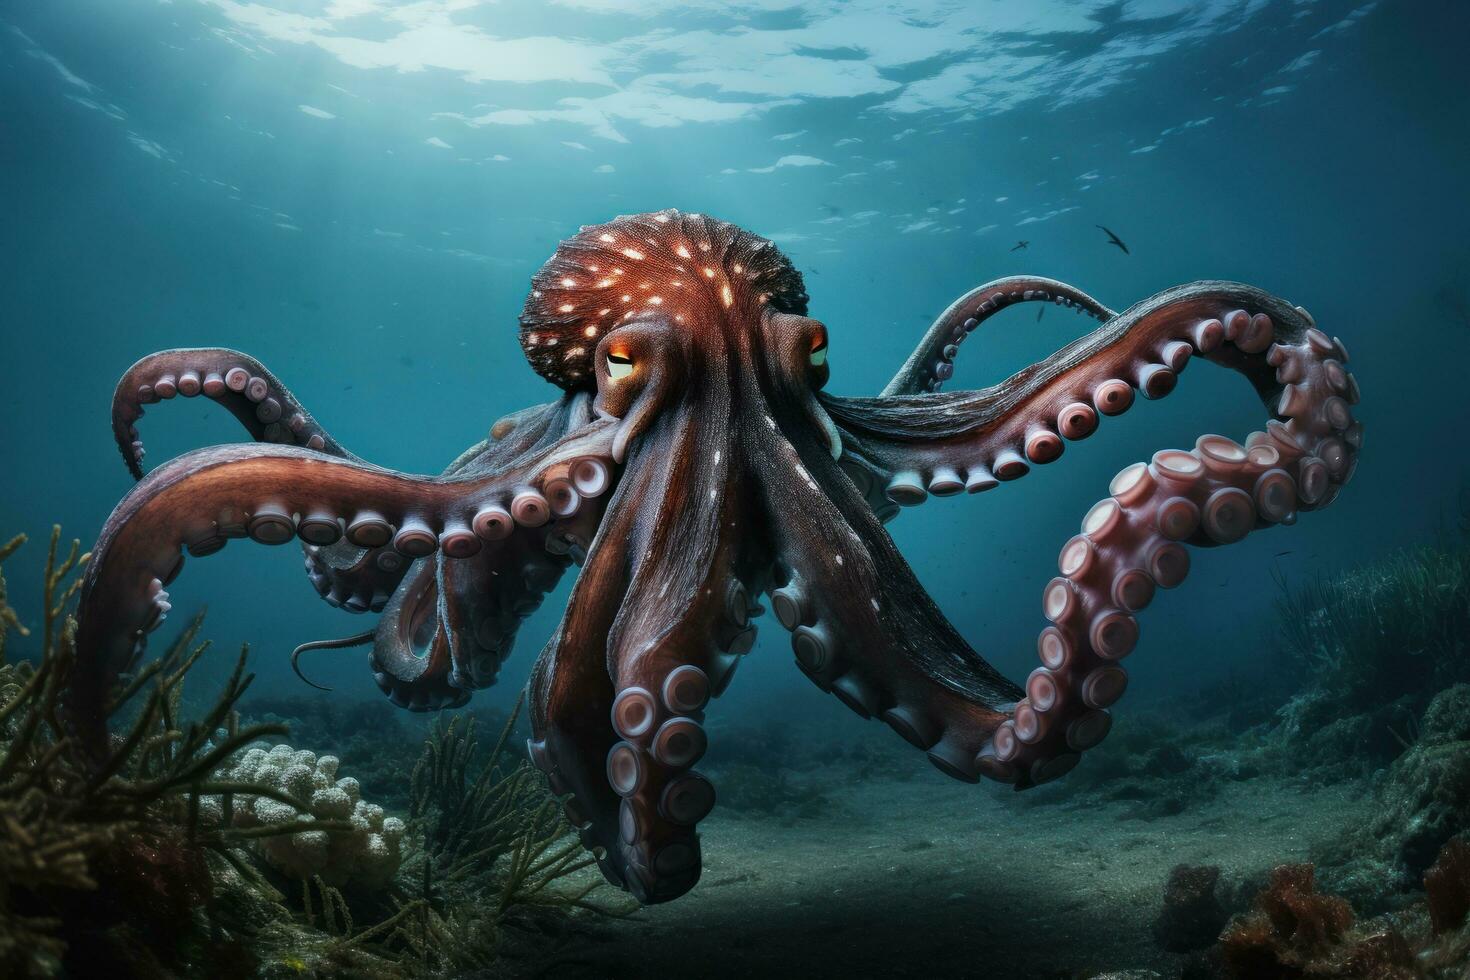 a large octopus swims in the depths of the ocean photo